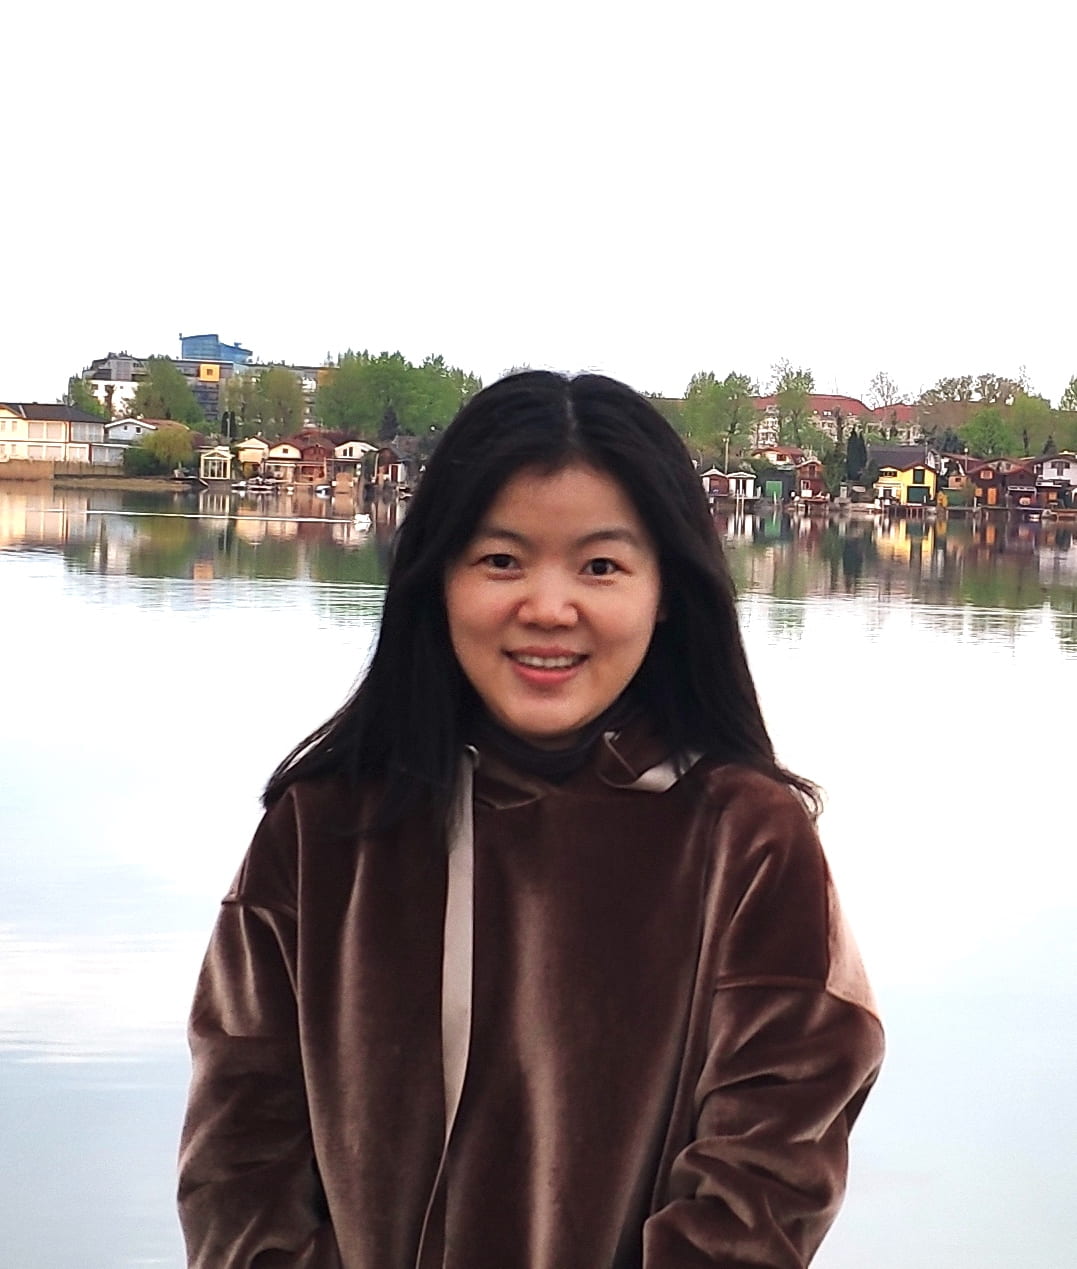 Yali Zhu posing for photo in front of a body of water